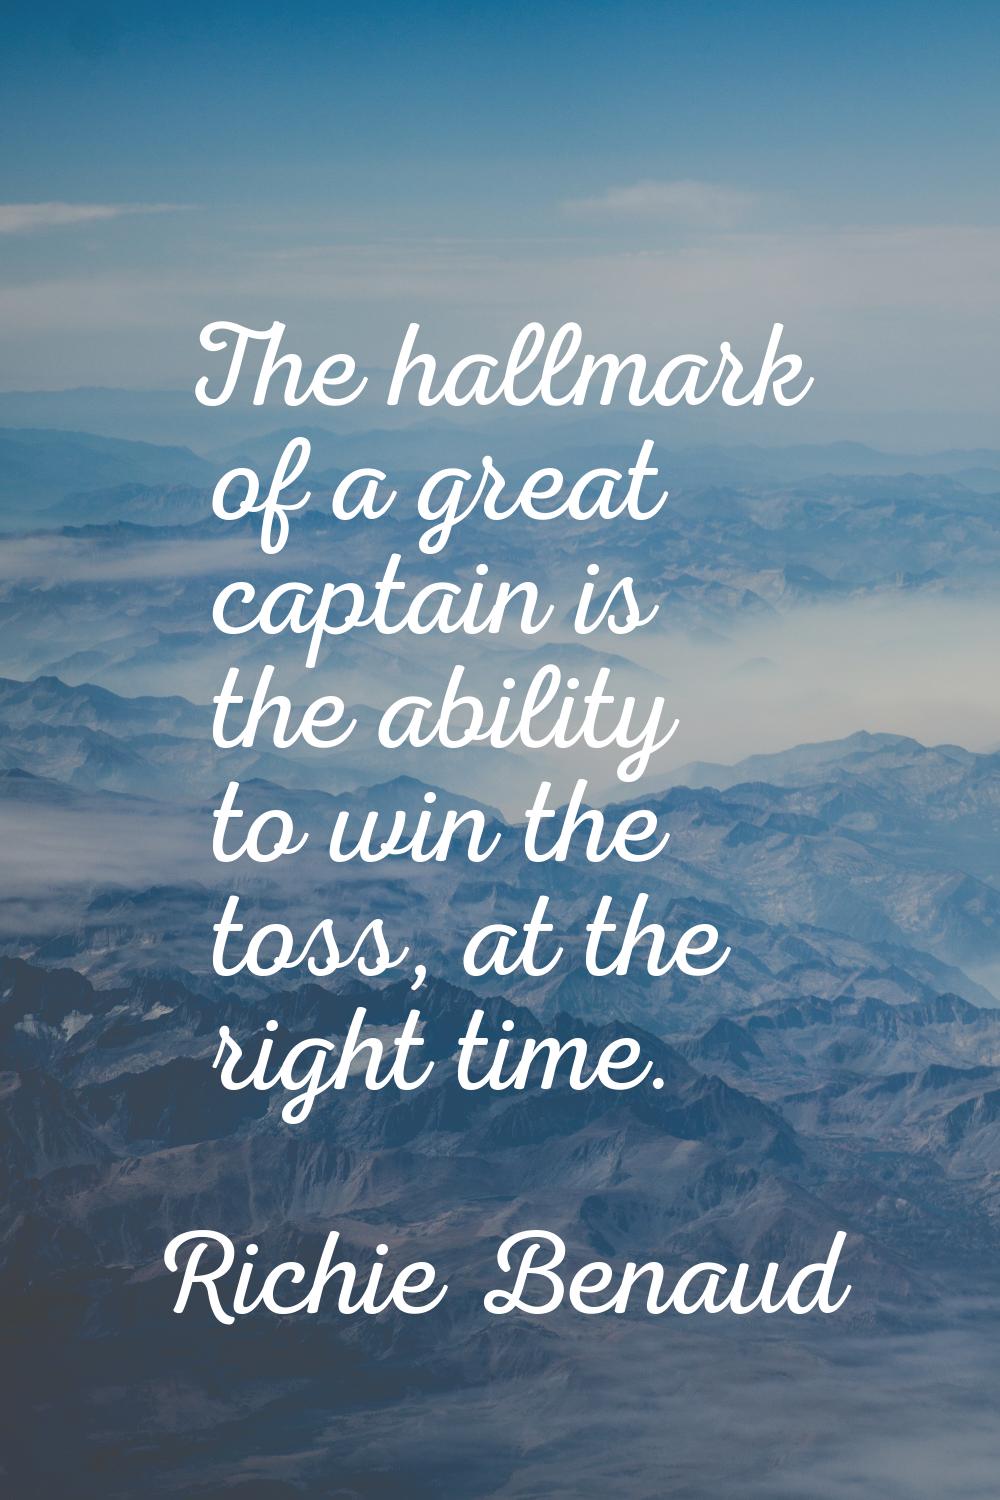 The hallmark of a great captain is the ability to win the toss, at the right time.